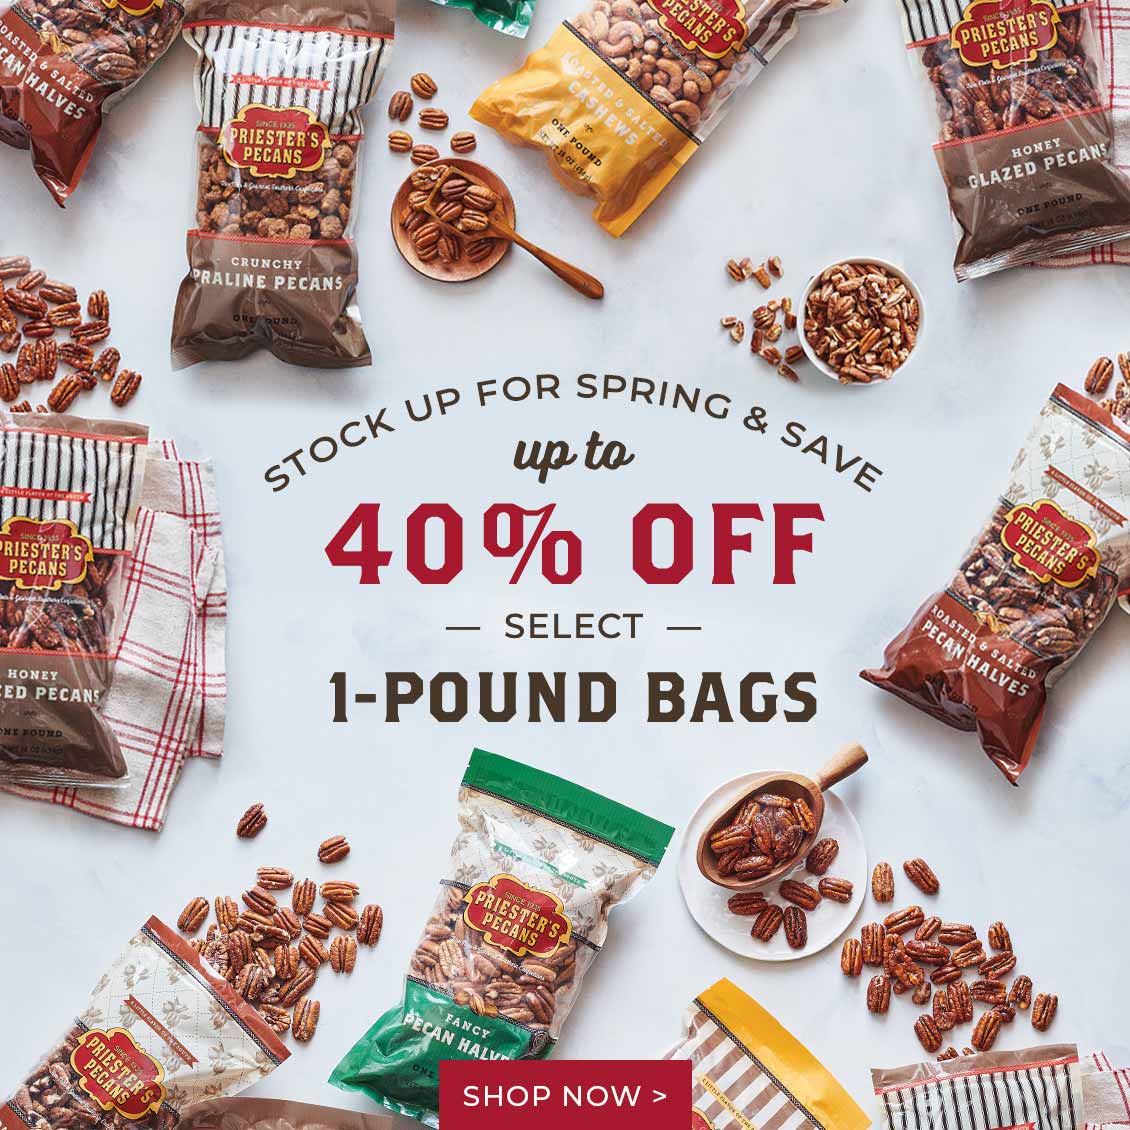 STOCK UP FOR SPRING & SAVE up to 40% OFF select 1-POUND BAGS8 >